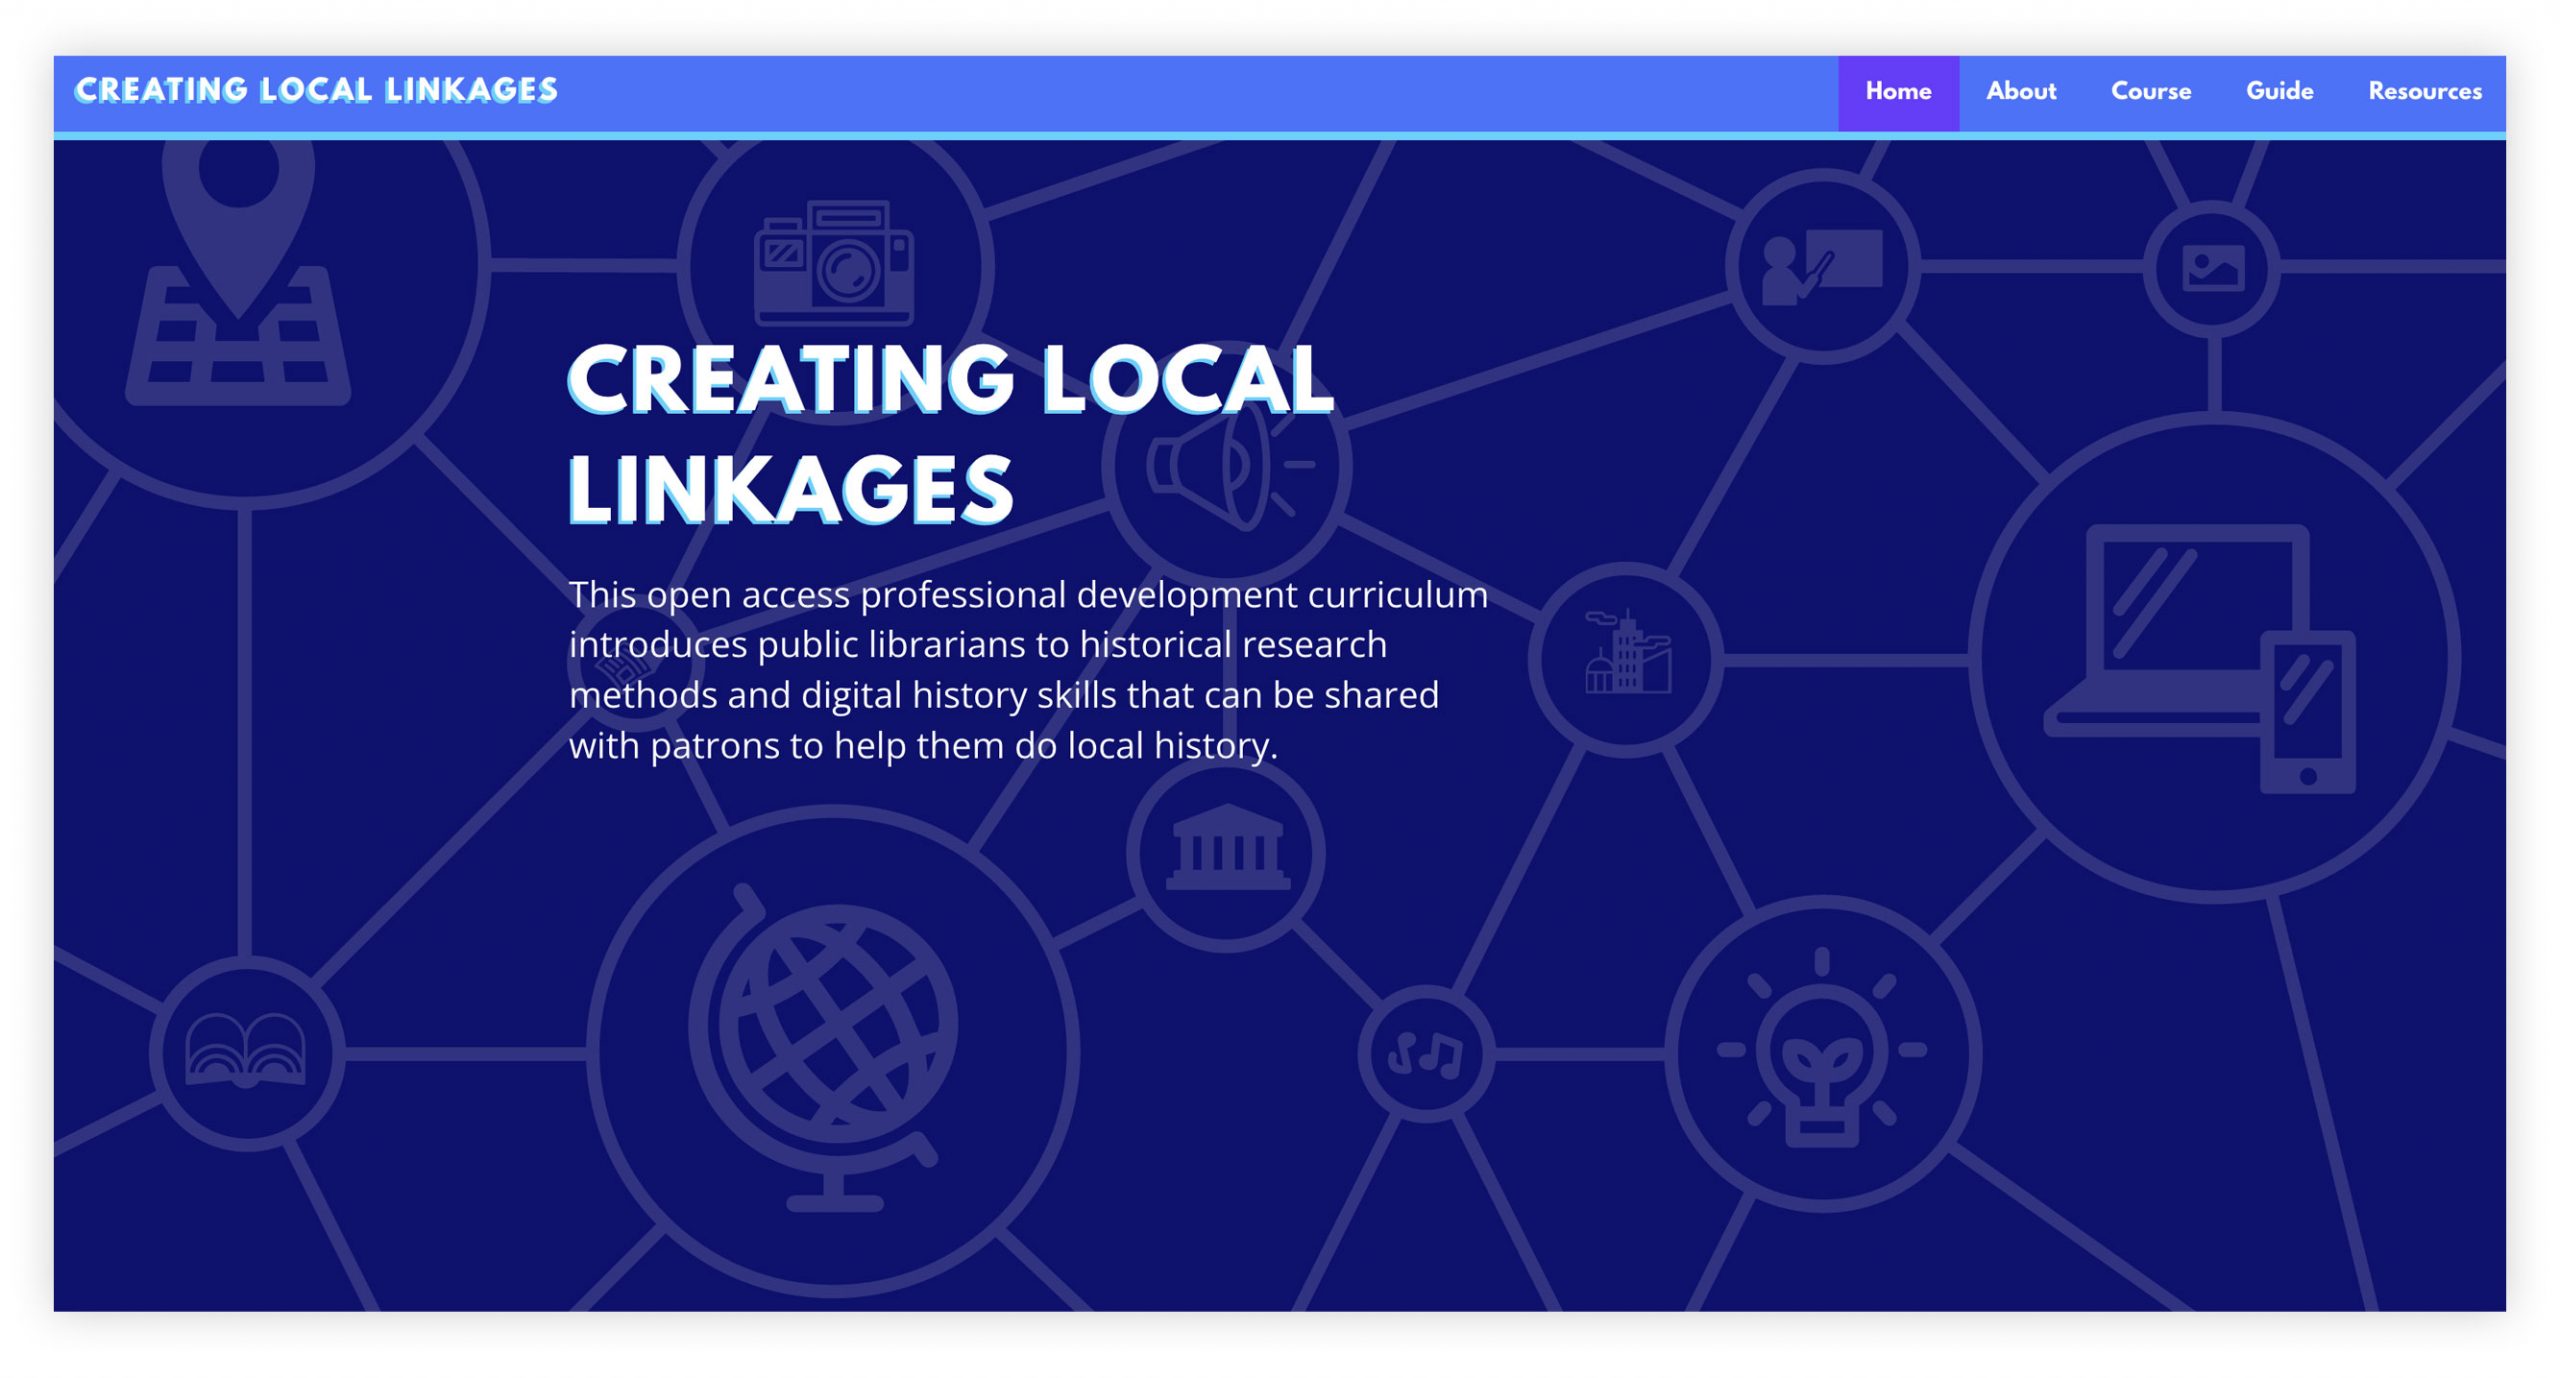 Screengrab of the Creating Local Linkages website home page.